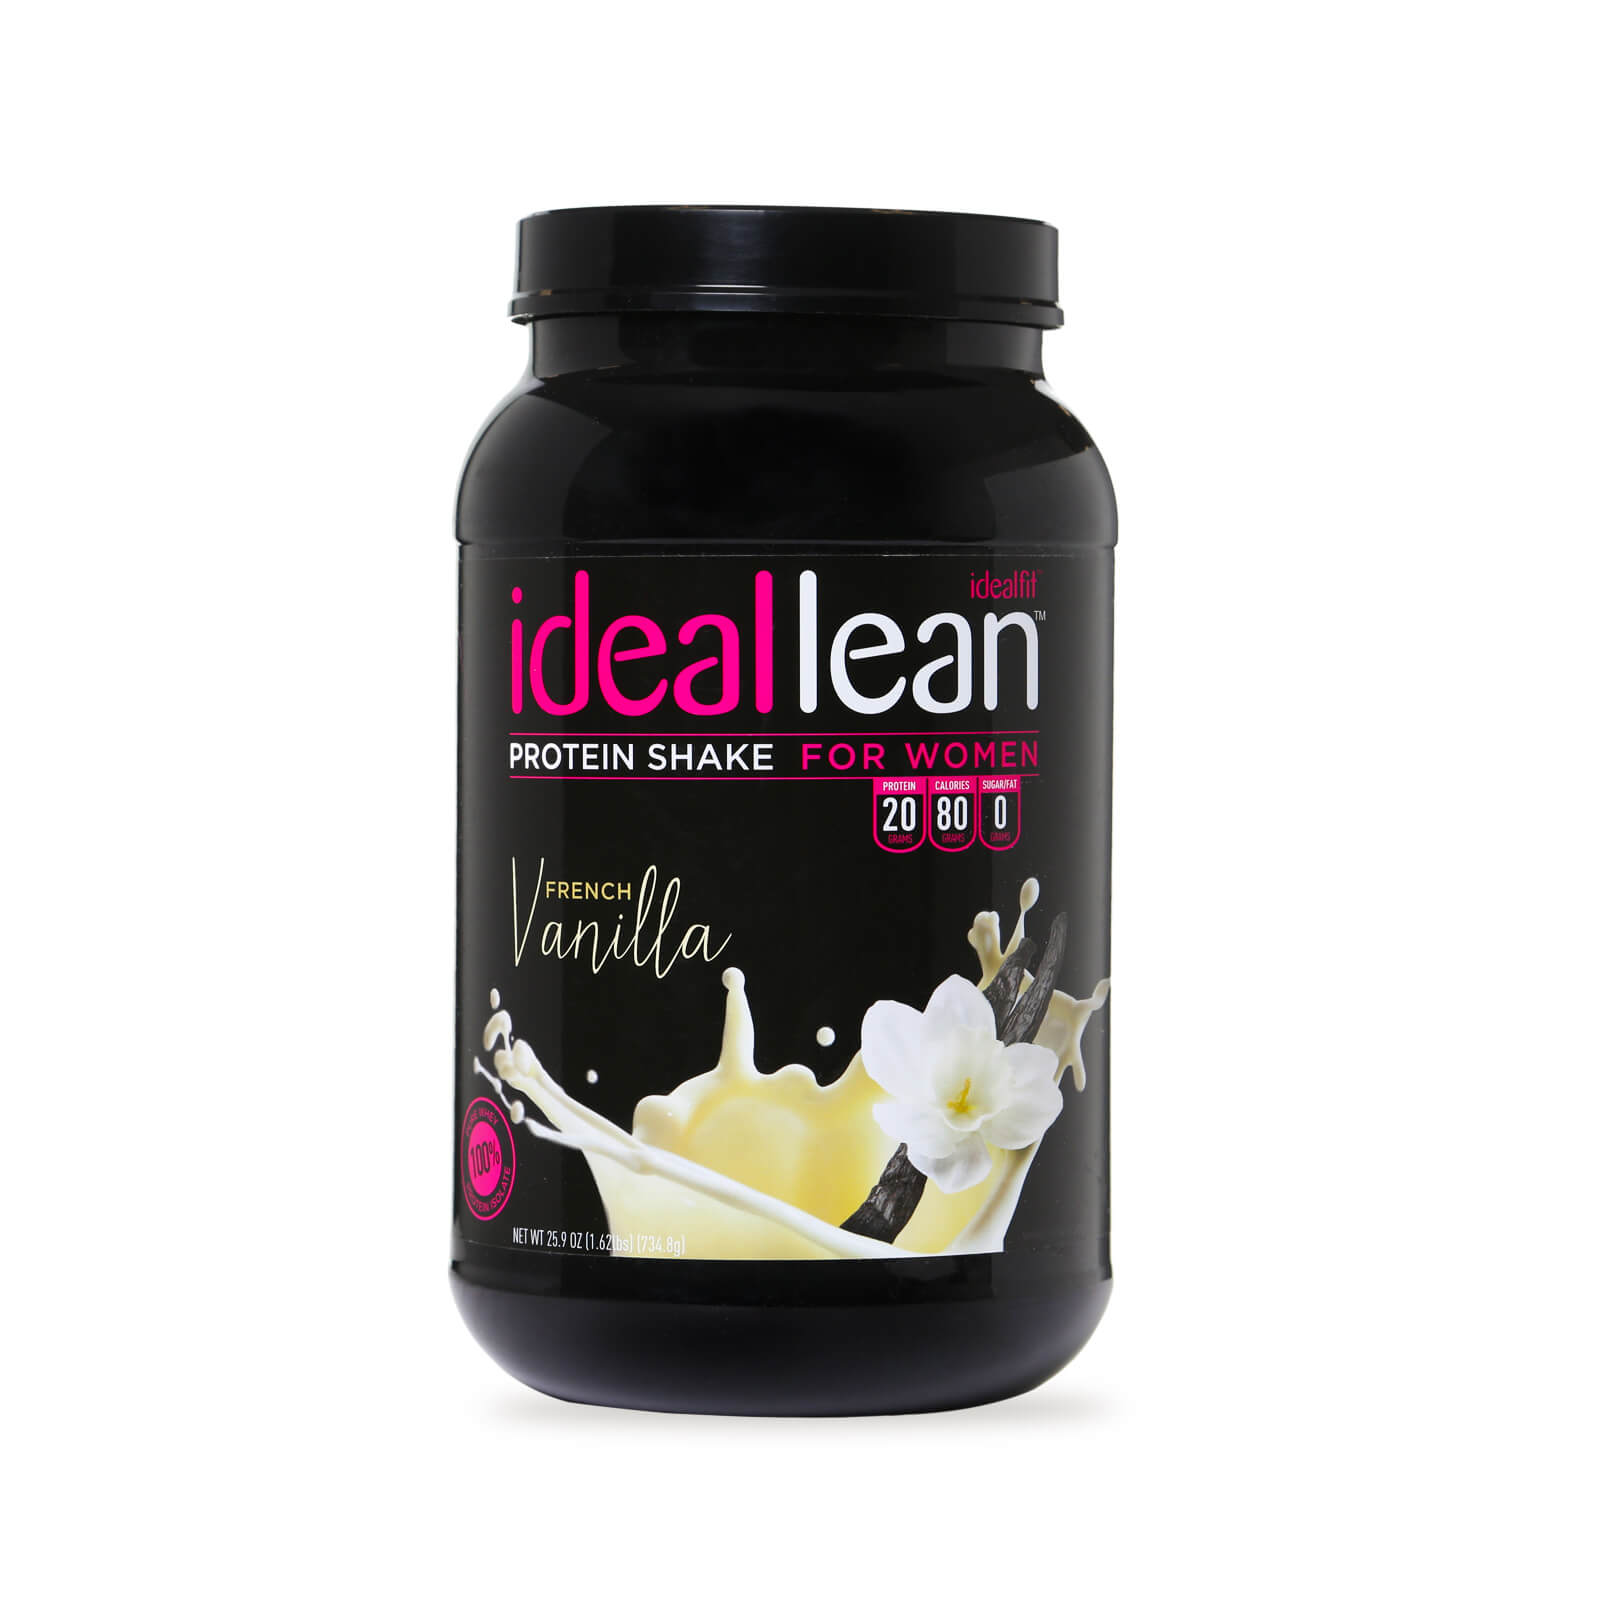 Lean protein for women